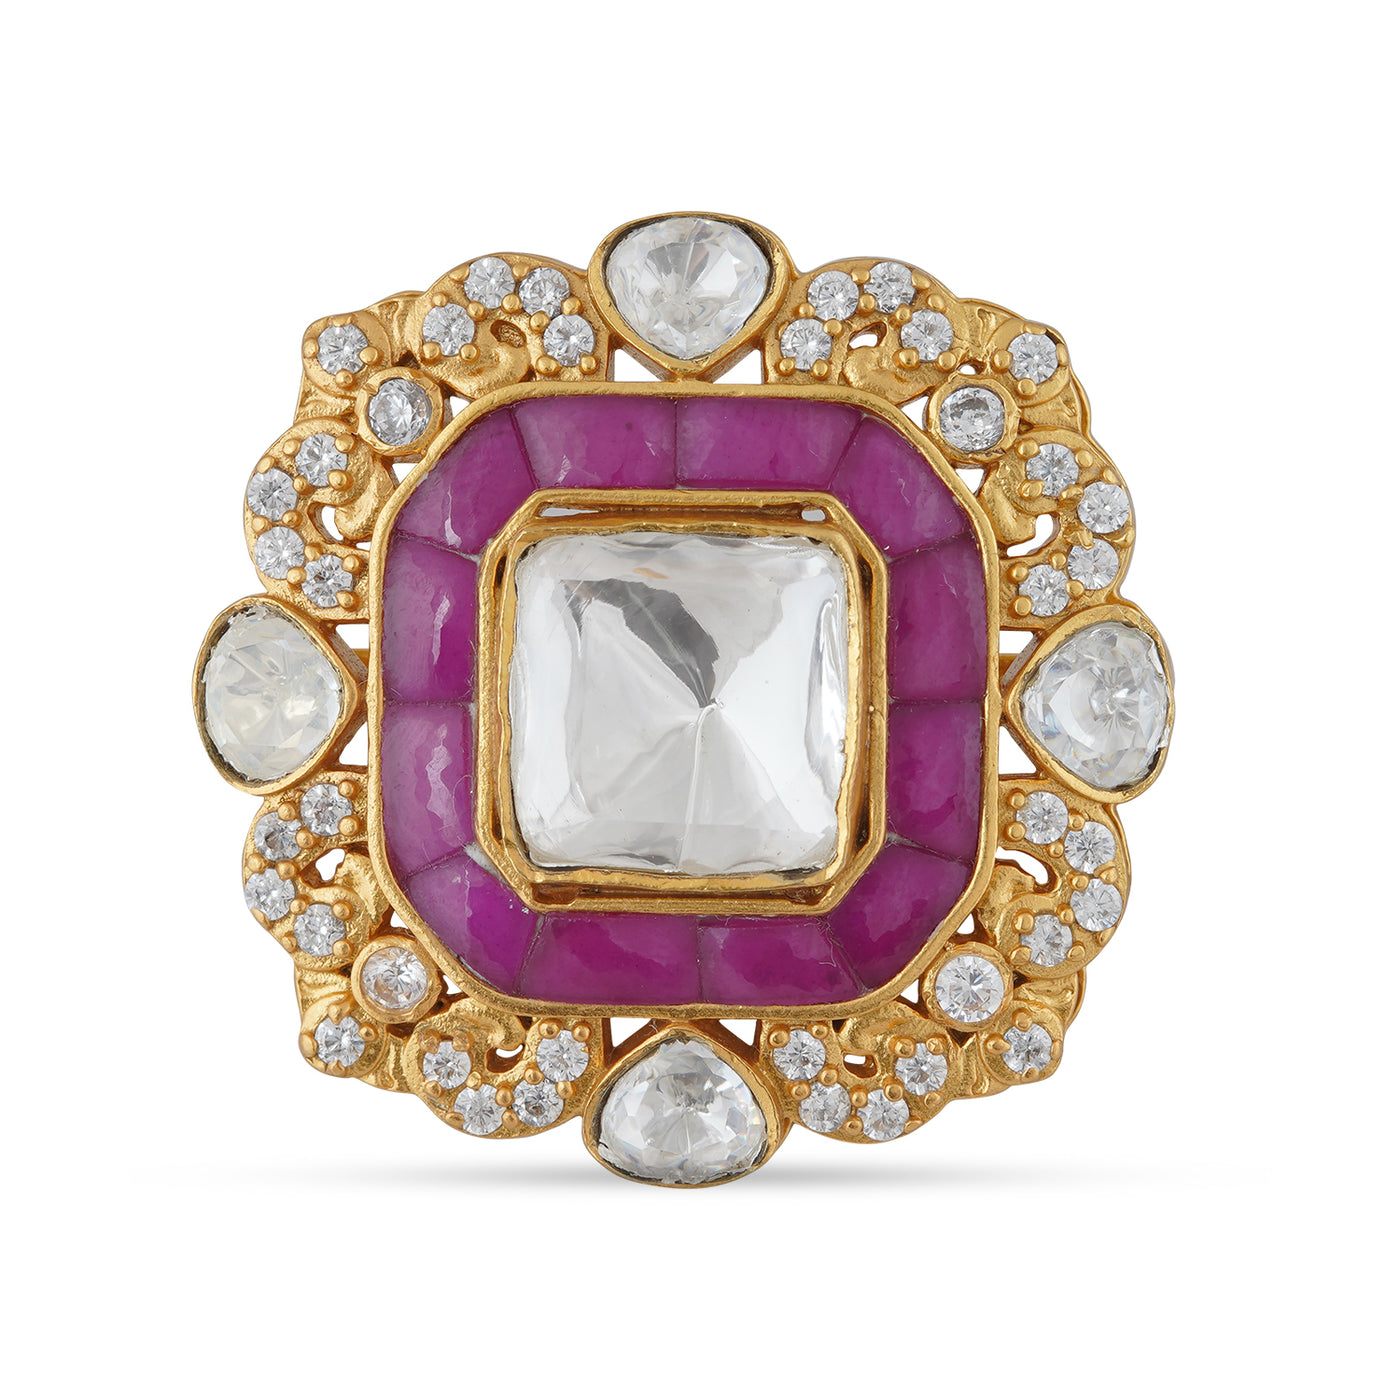  Pink and Polki Stone Gold Ring